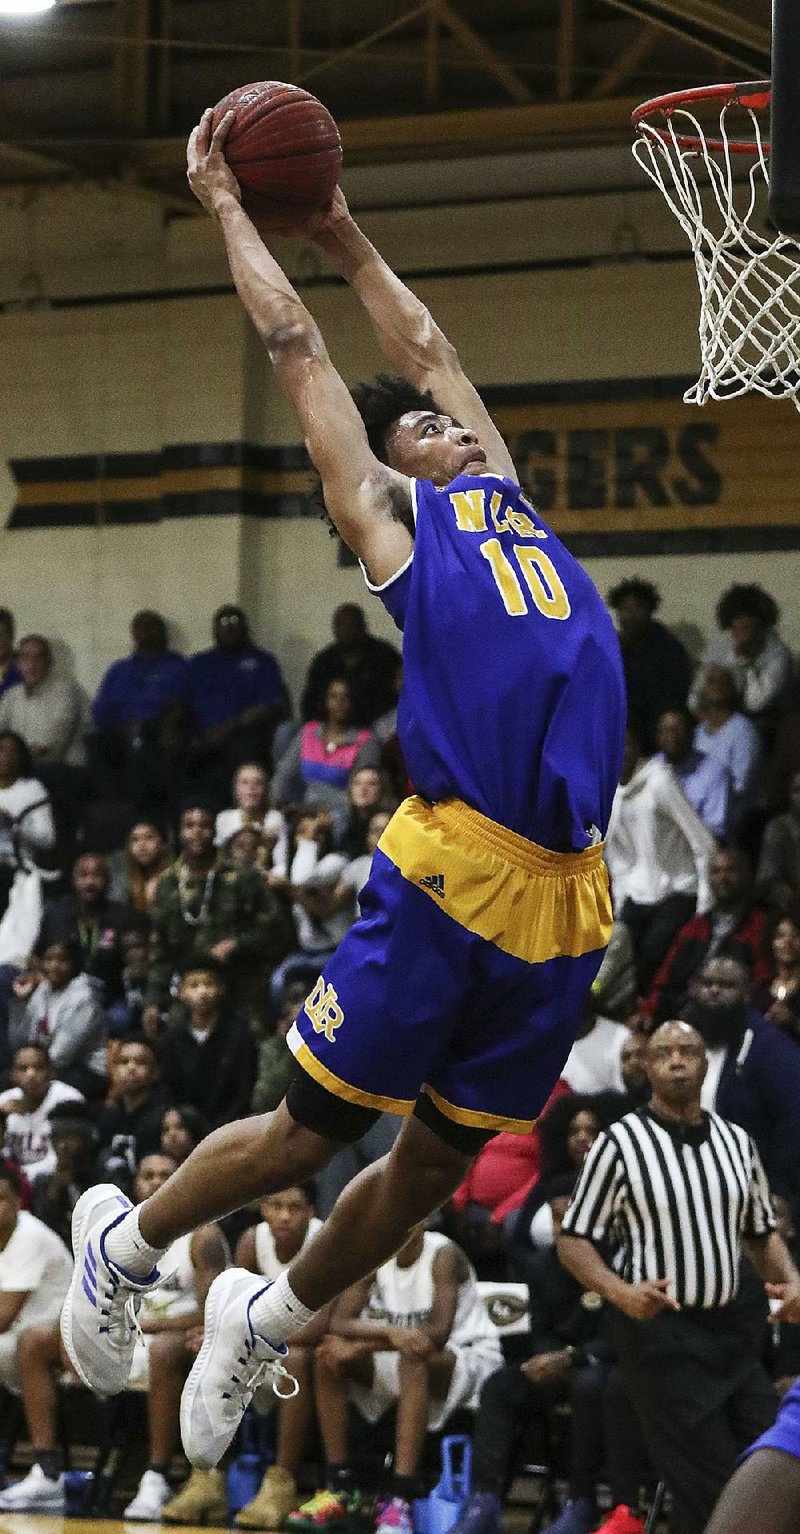 North Little Rock’s Collin Moore goes up for a dunk during the Charging Wildcats’ 67-63 overtime victory
over Little Rock Central at Tiger Fieldhouse. For more photos, visit arkansasonline.com/galleries.